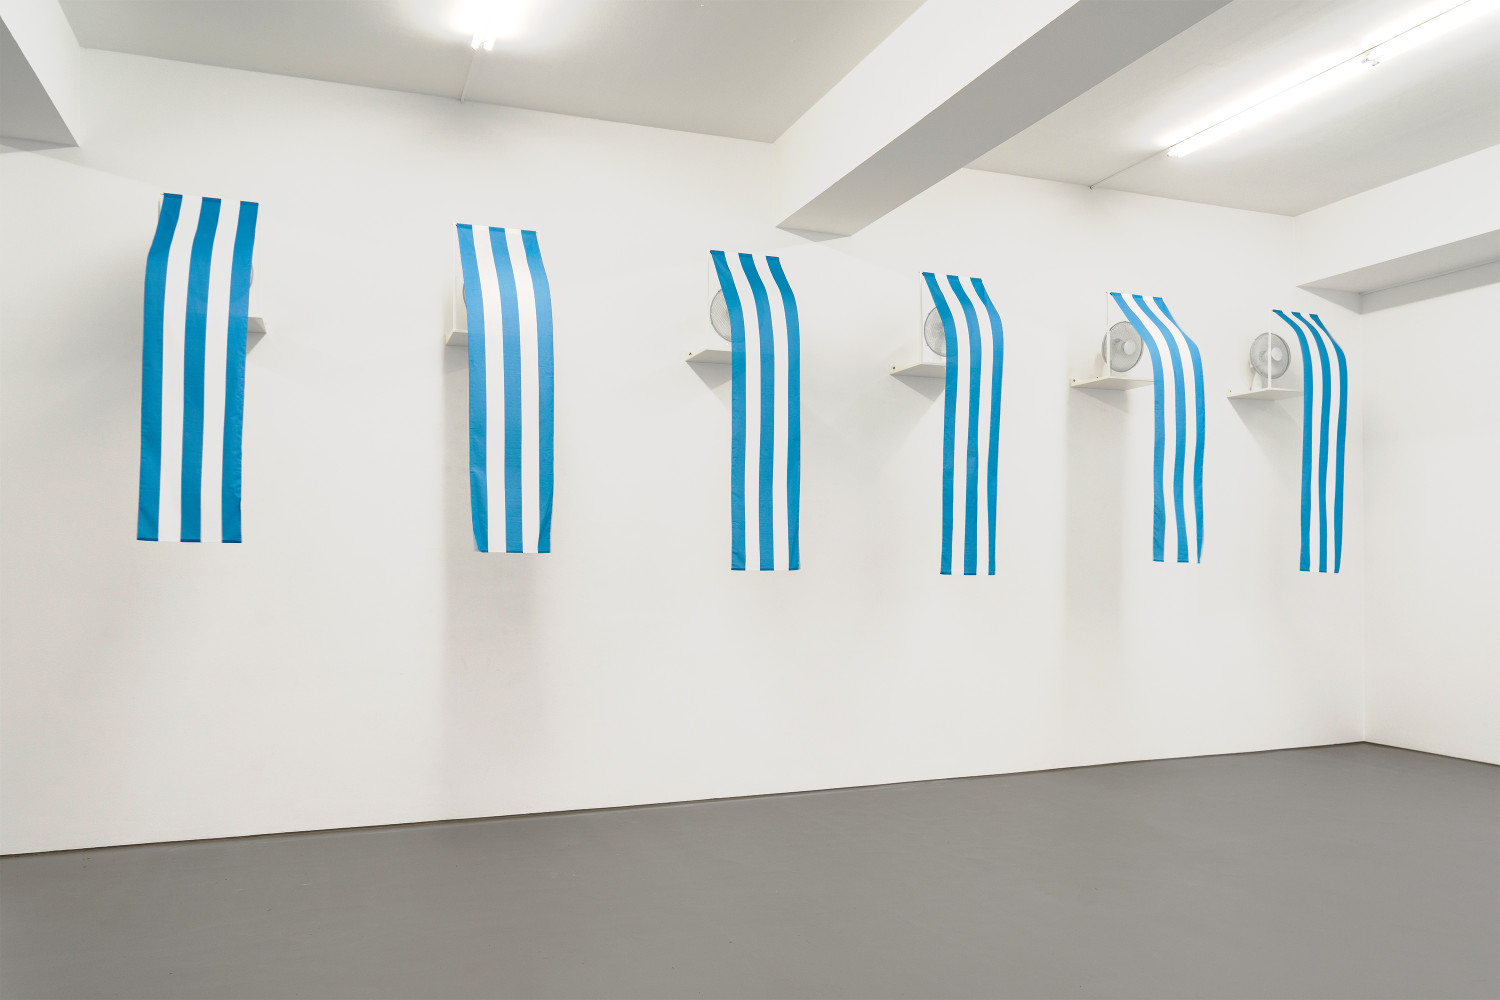 Daniel Buren, ‘Westwind - travail situé, 2010 fabric, steel, fans, clips (fabric with blue and white stripes)’, 2010, Fabric, steel, fans, clips